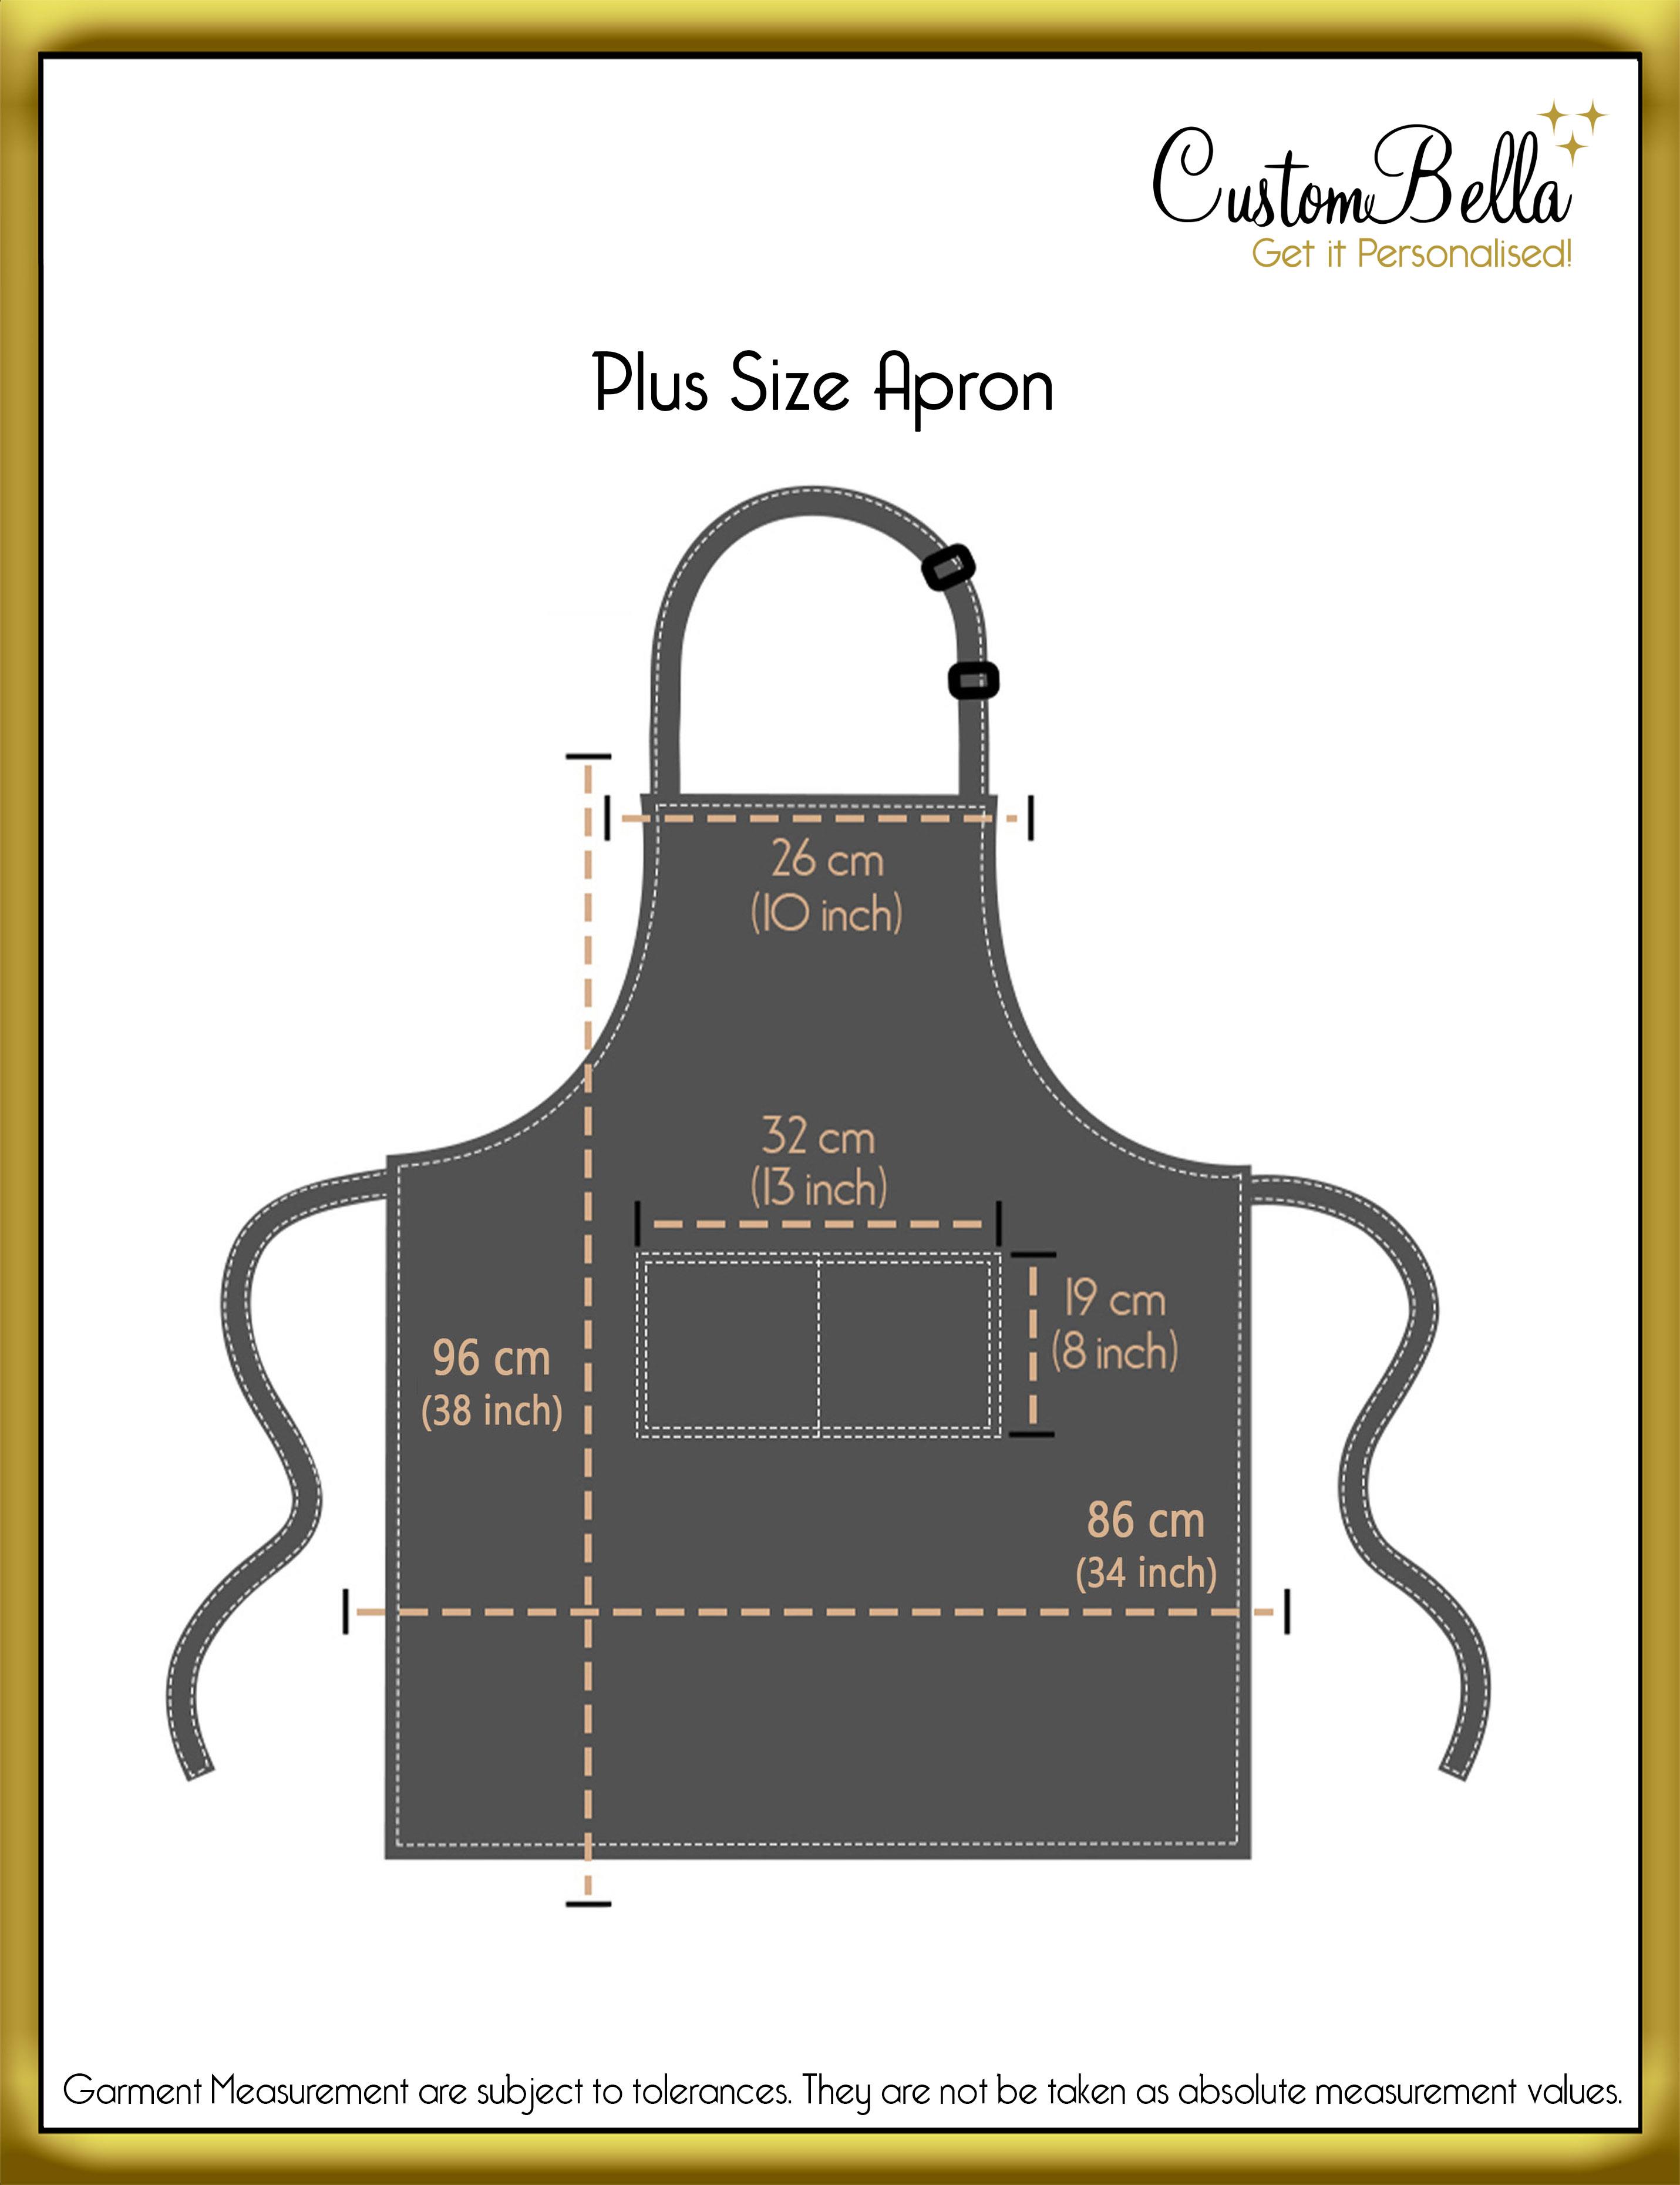 Personalised Plus Size Apron Printed dimensions